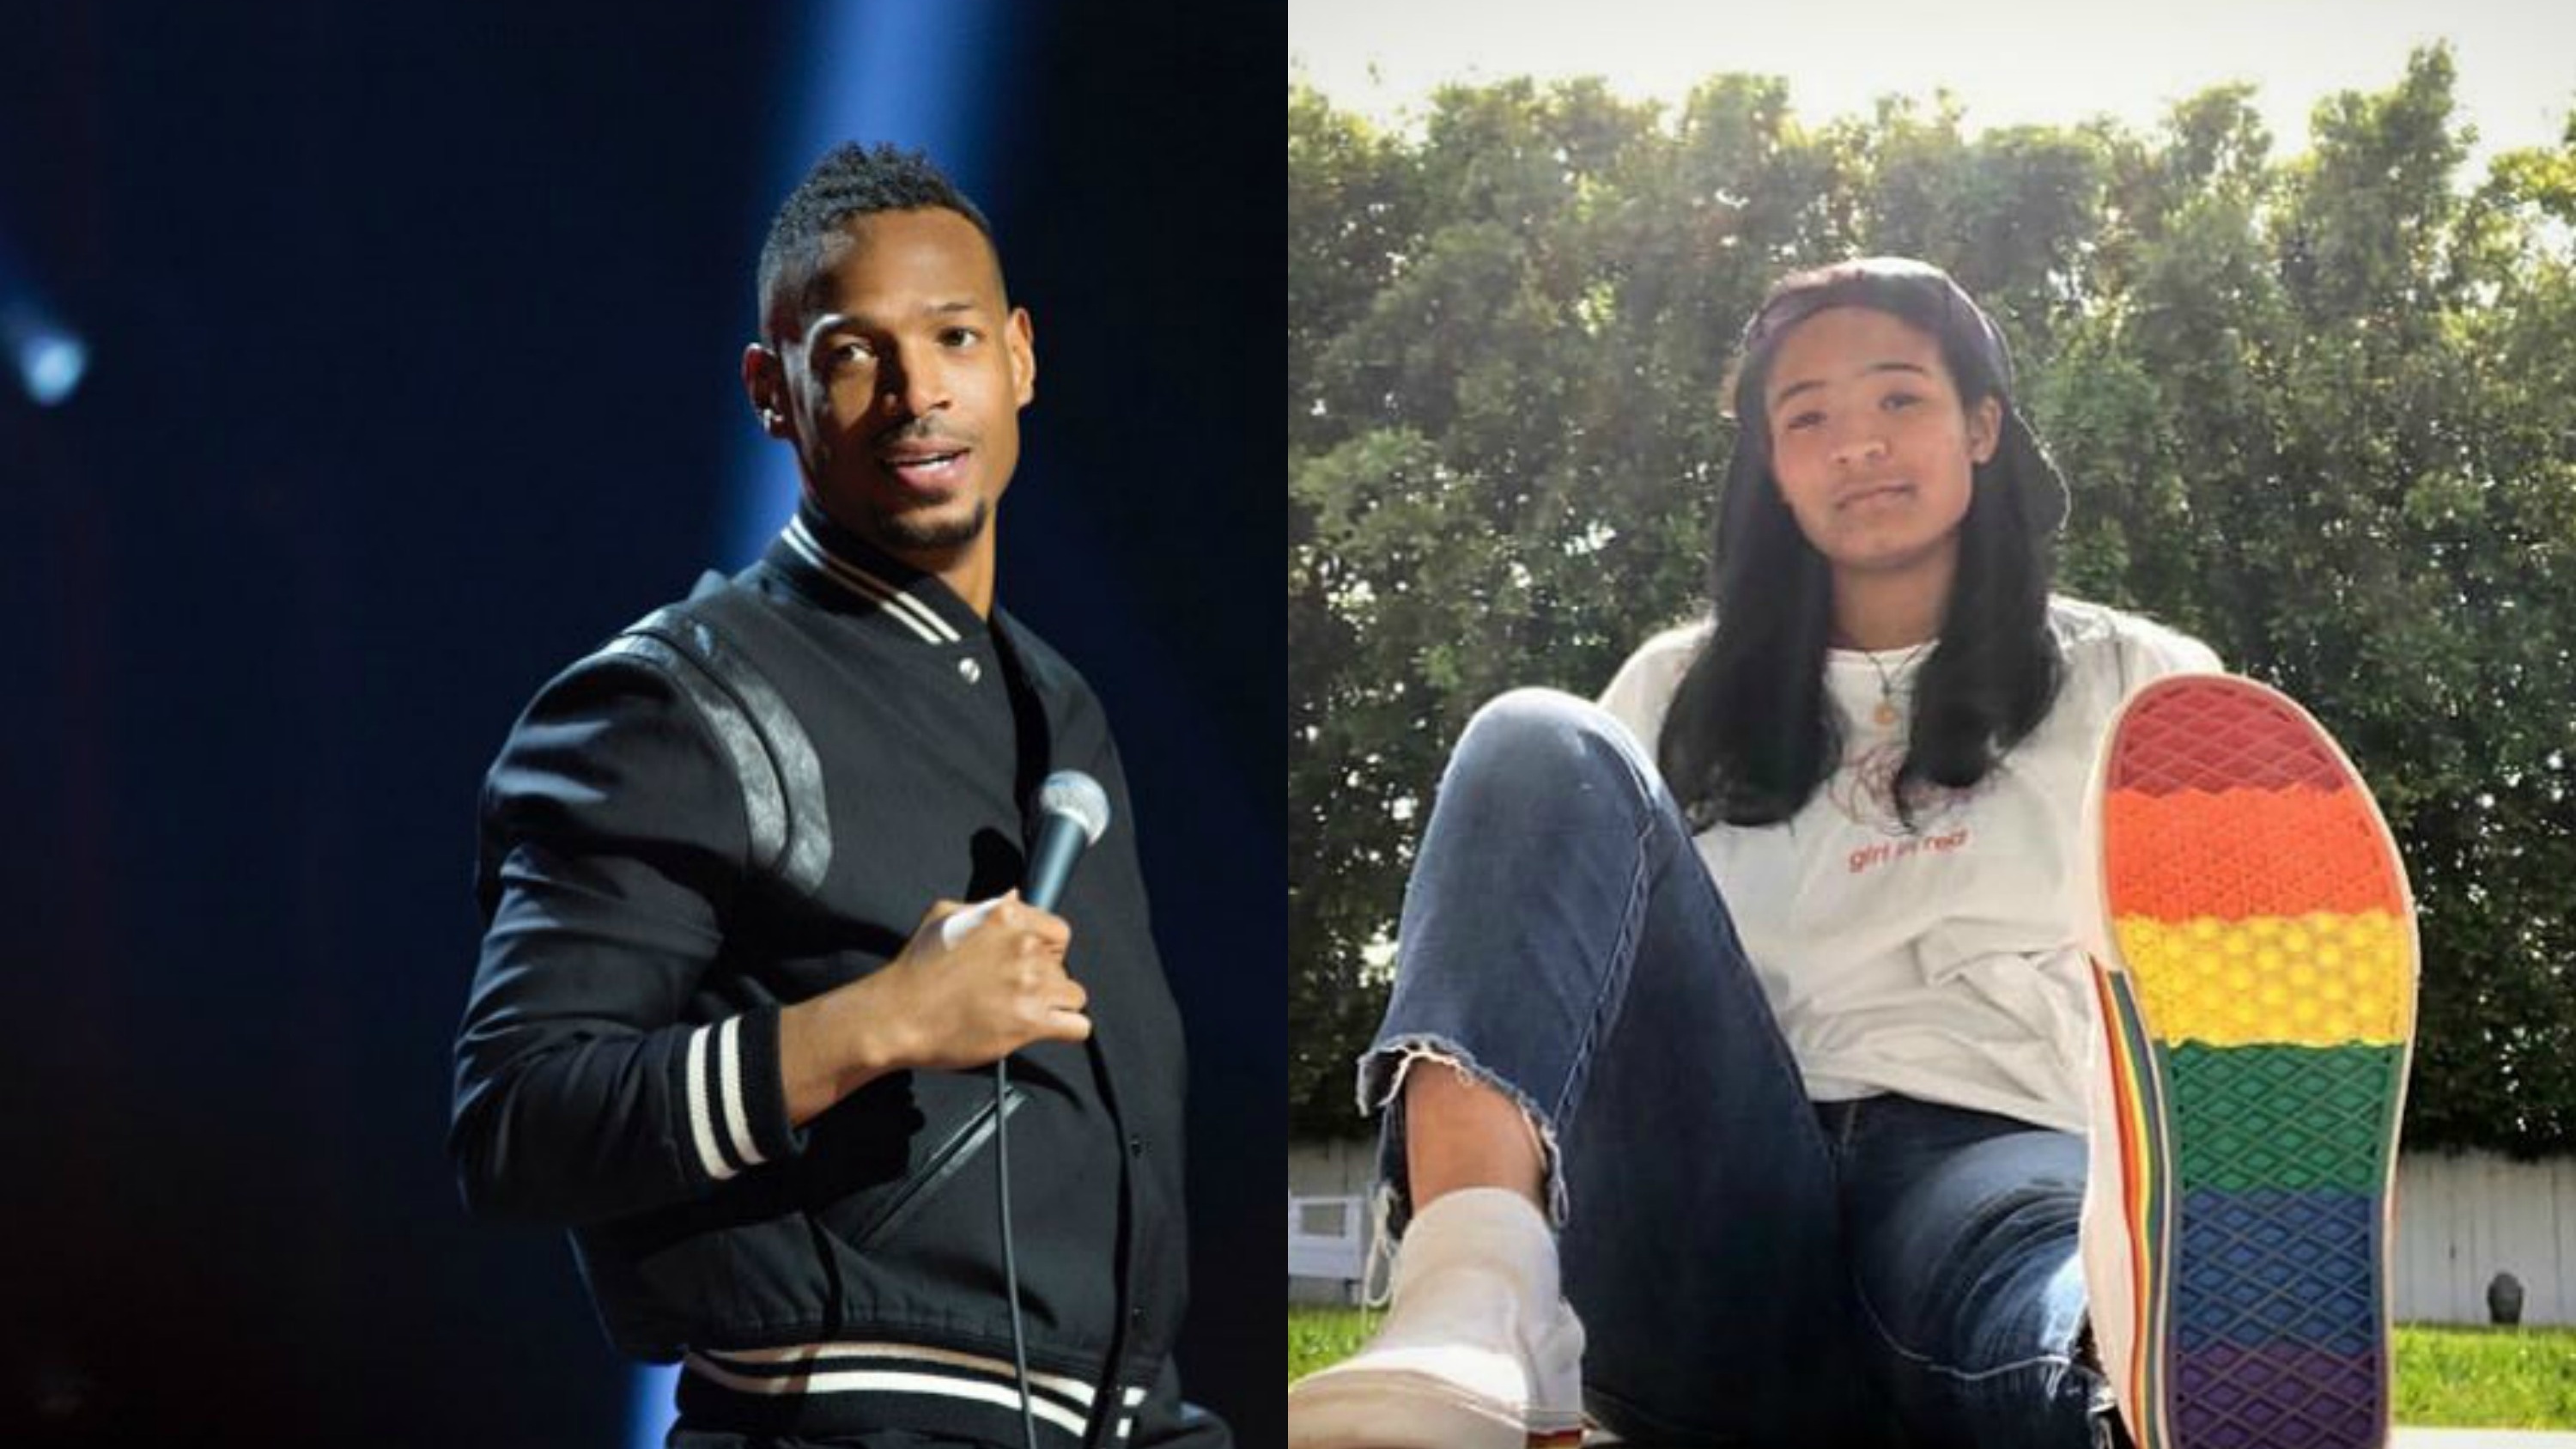 Marlon Wayans Lays Into Homophobes Trying To Spread Their Foolishness After He Posts Tribute To His Lesbian Daughter